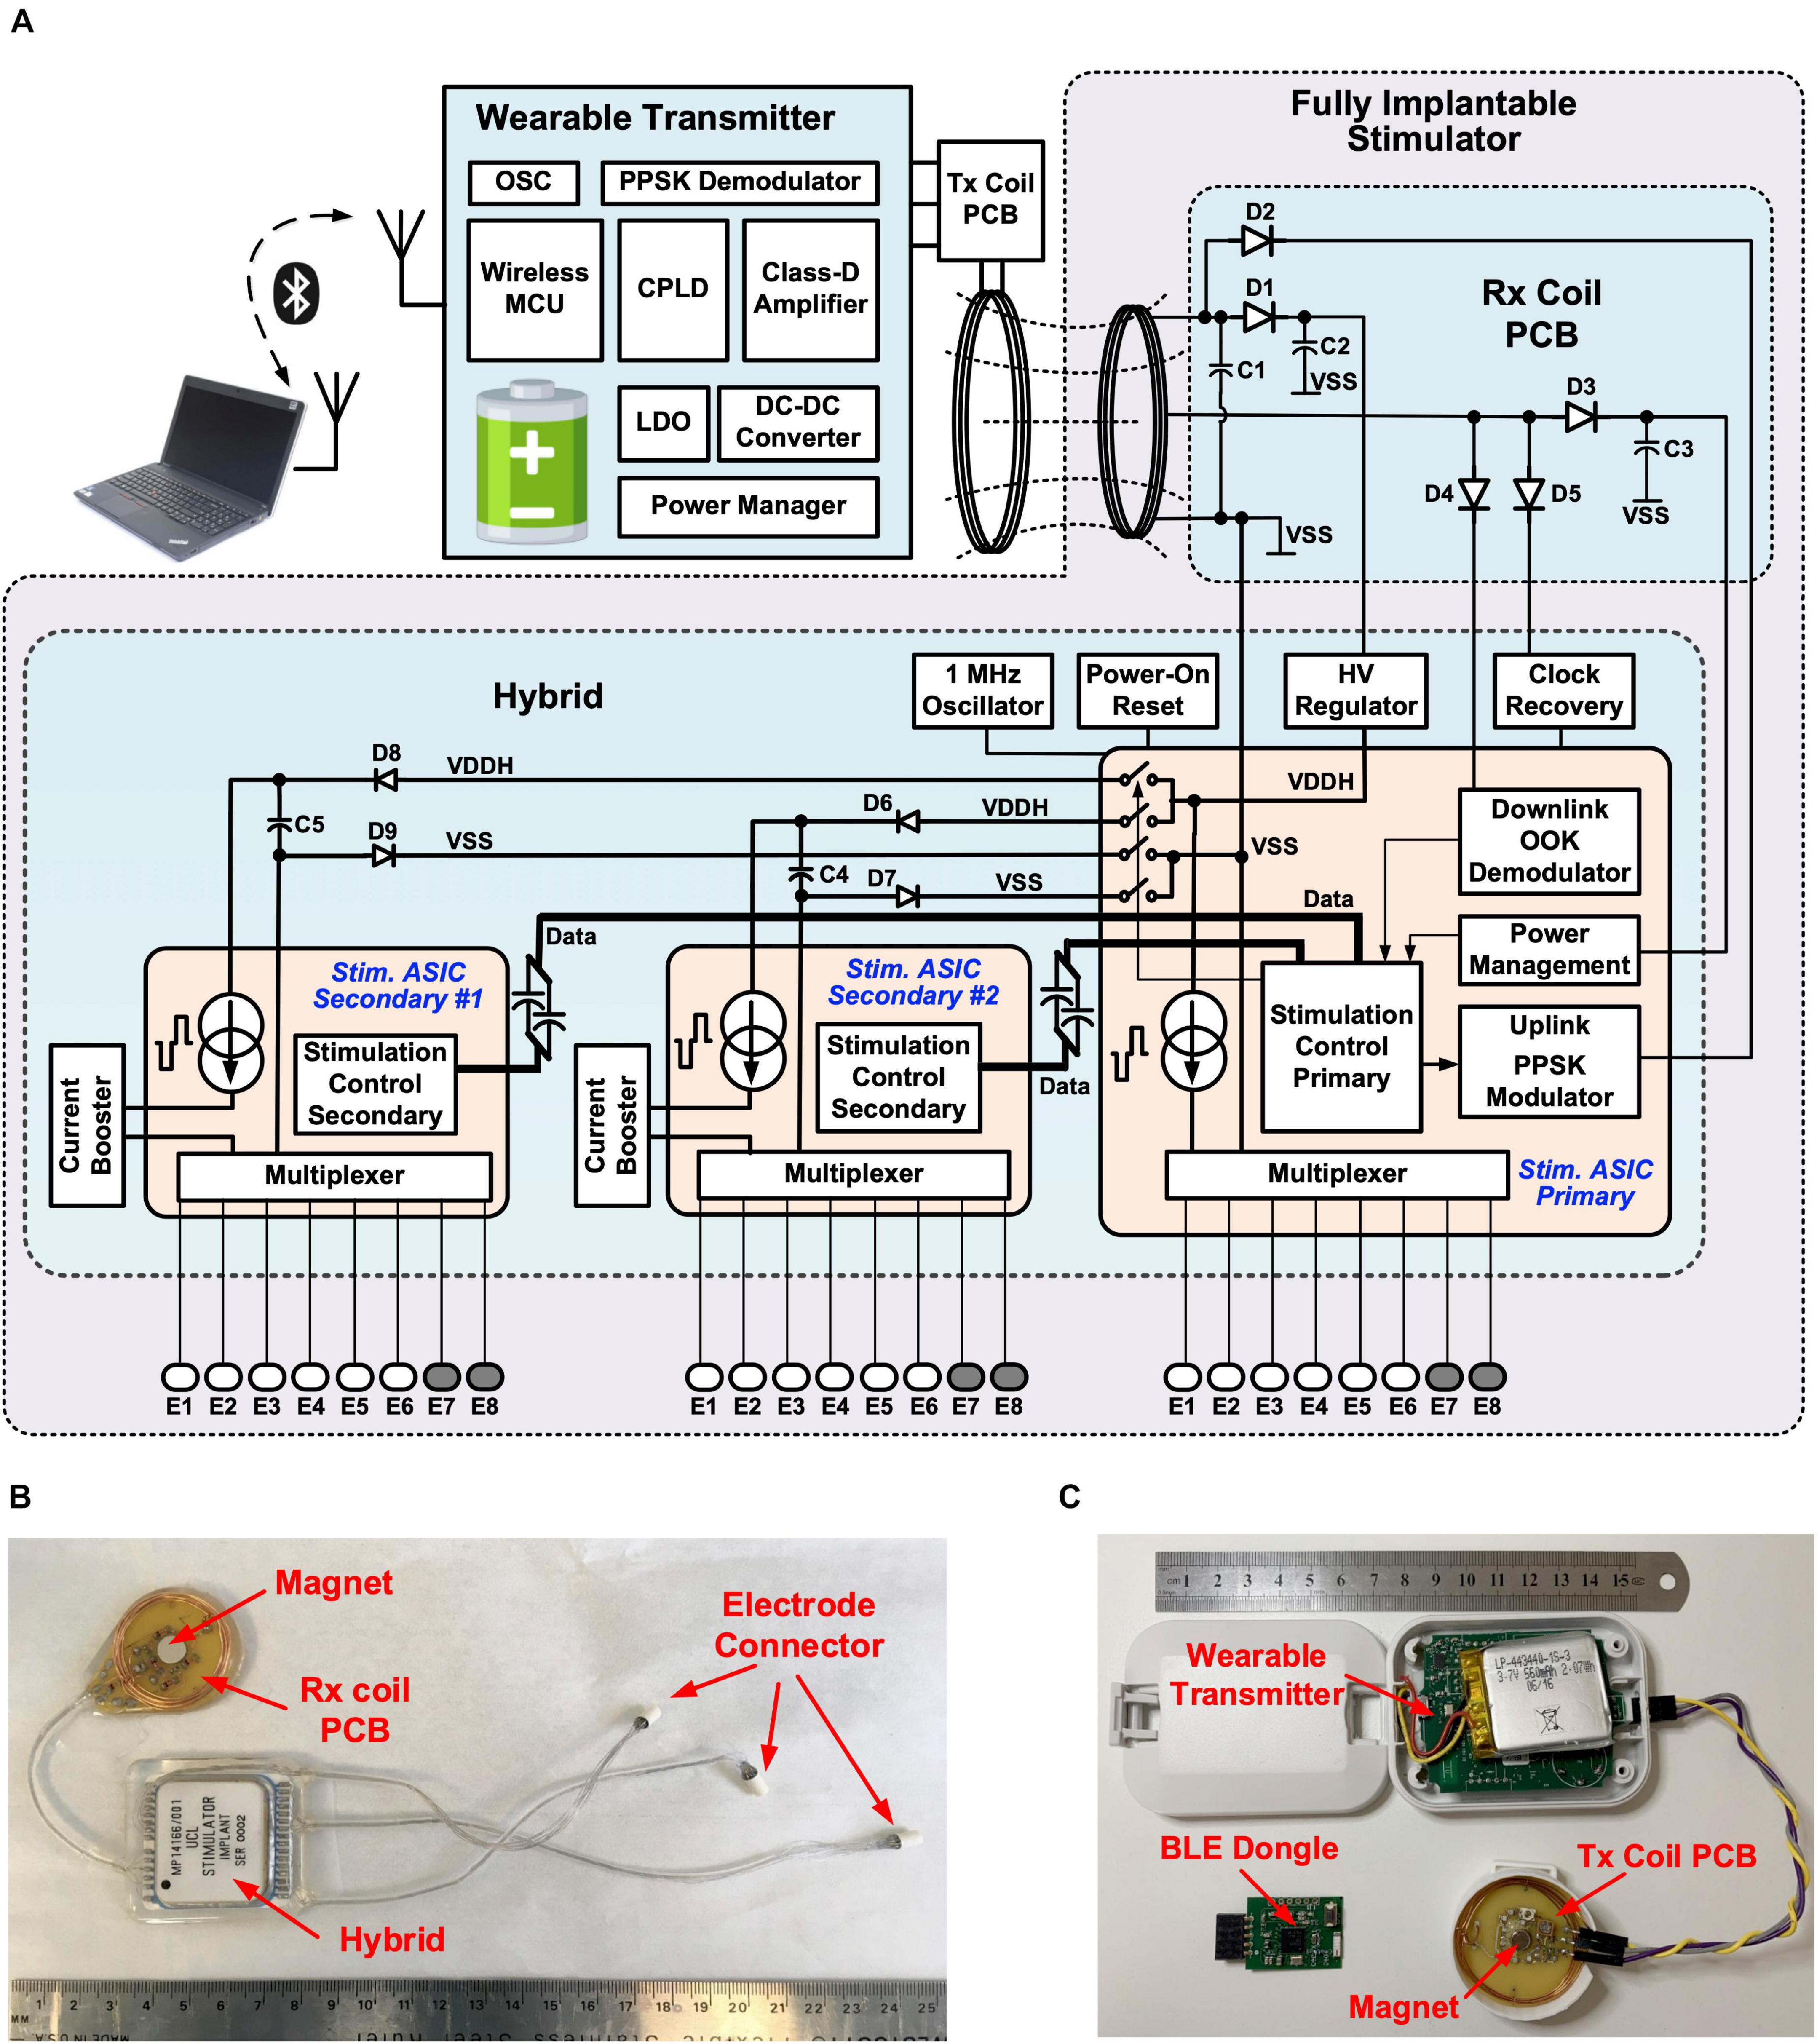 Se convierte en Maniobra Detener Frontiers | A Versatile Hermetically Sealed Microelectronic Implant for  Peripheral Nerve Stimulation Applications